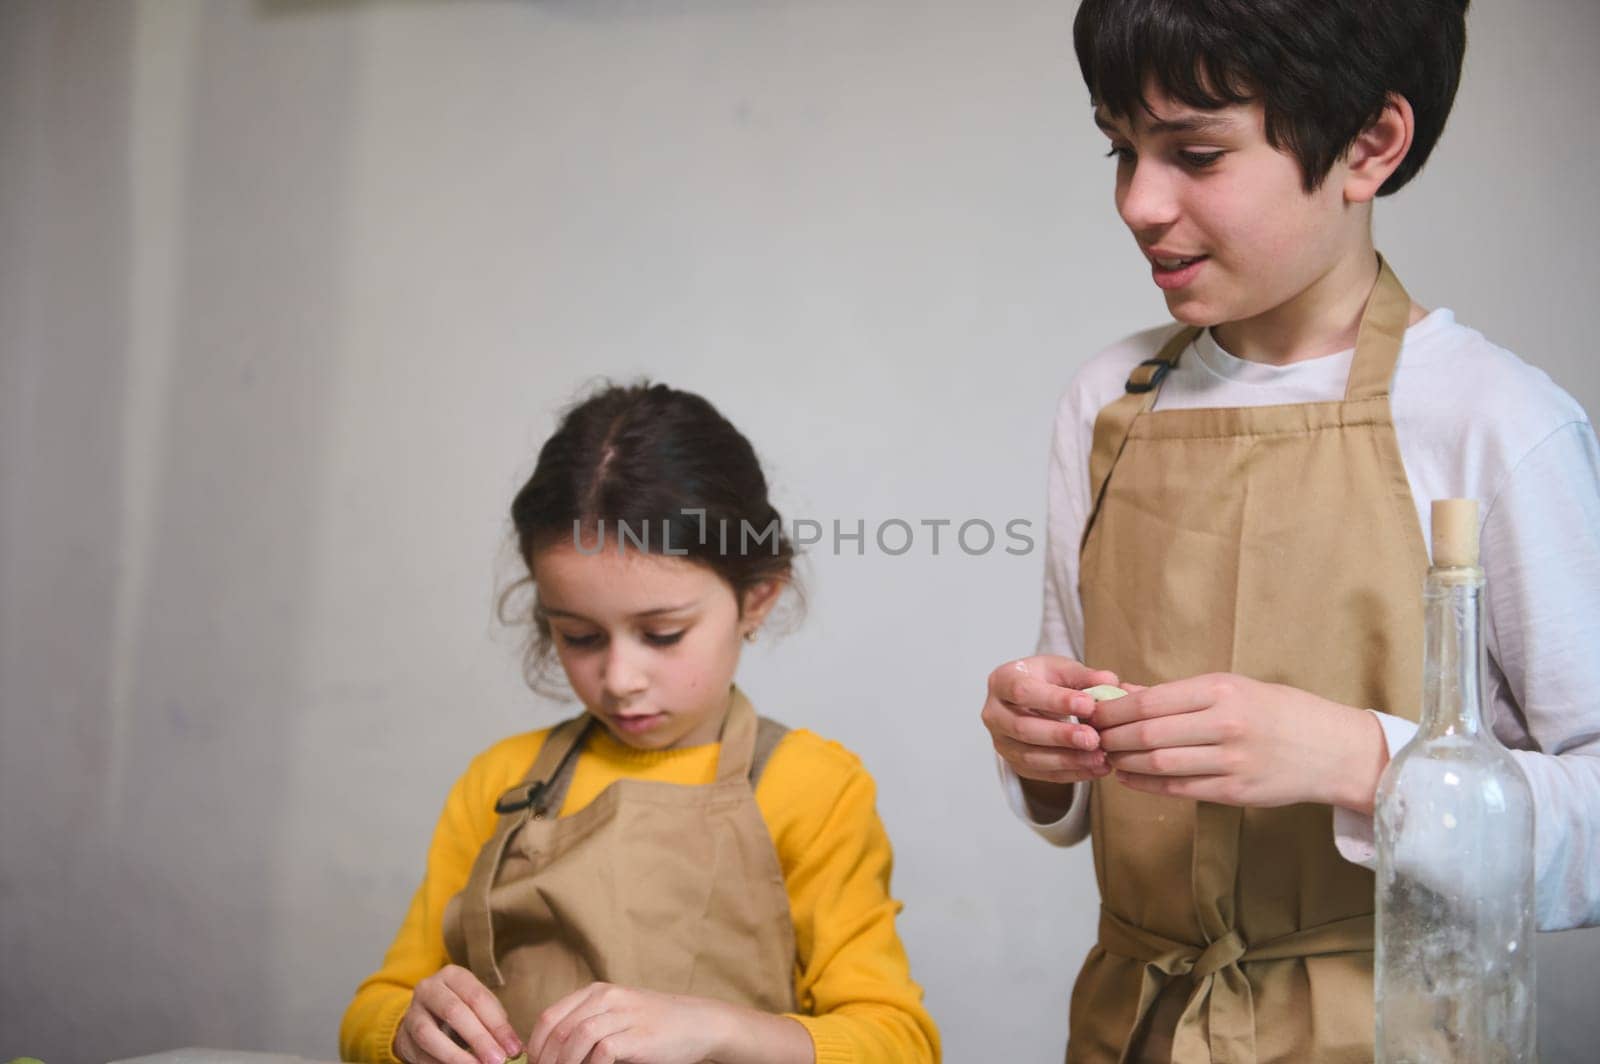 Boy and girl learning culinary at cooking class, making homemade dumplings with mashed potato filling by artgf